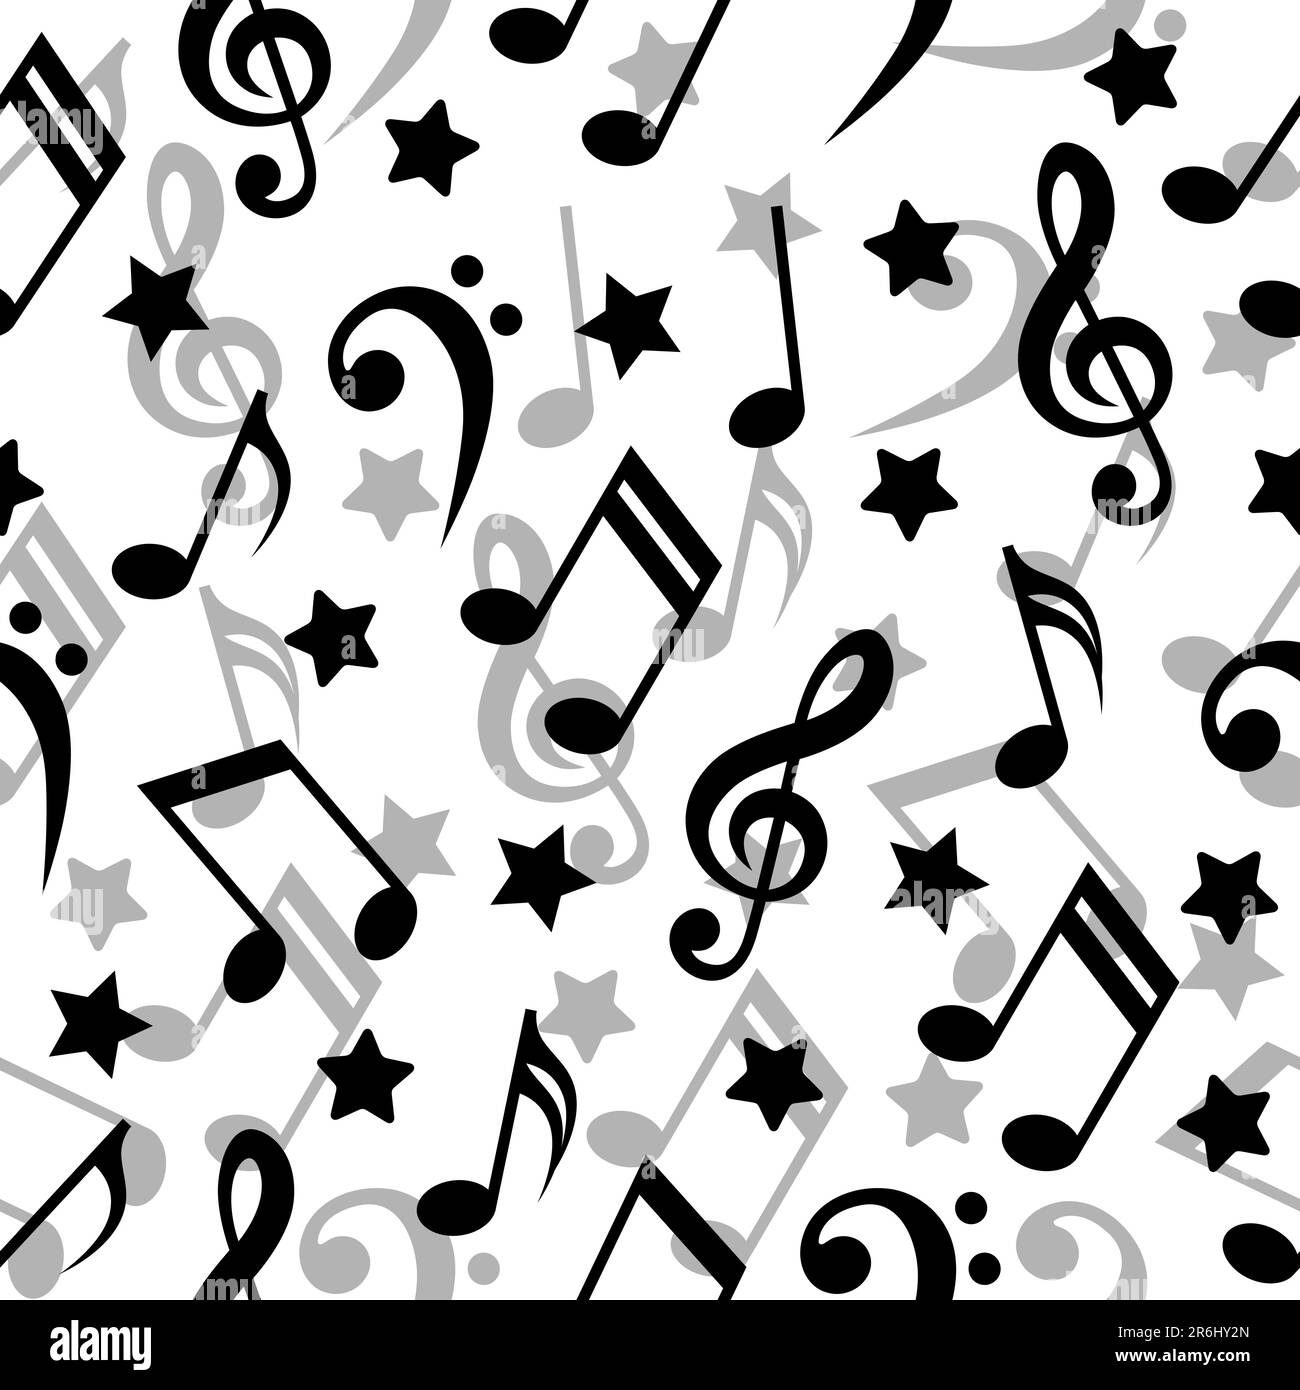 Seamless pattern with a music notes. Stock Vector